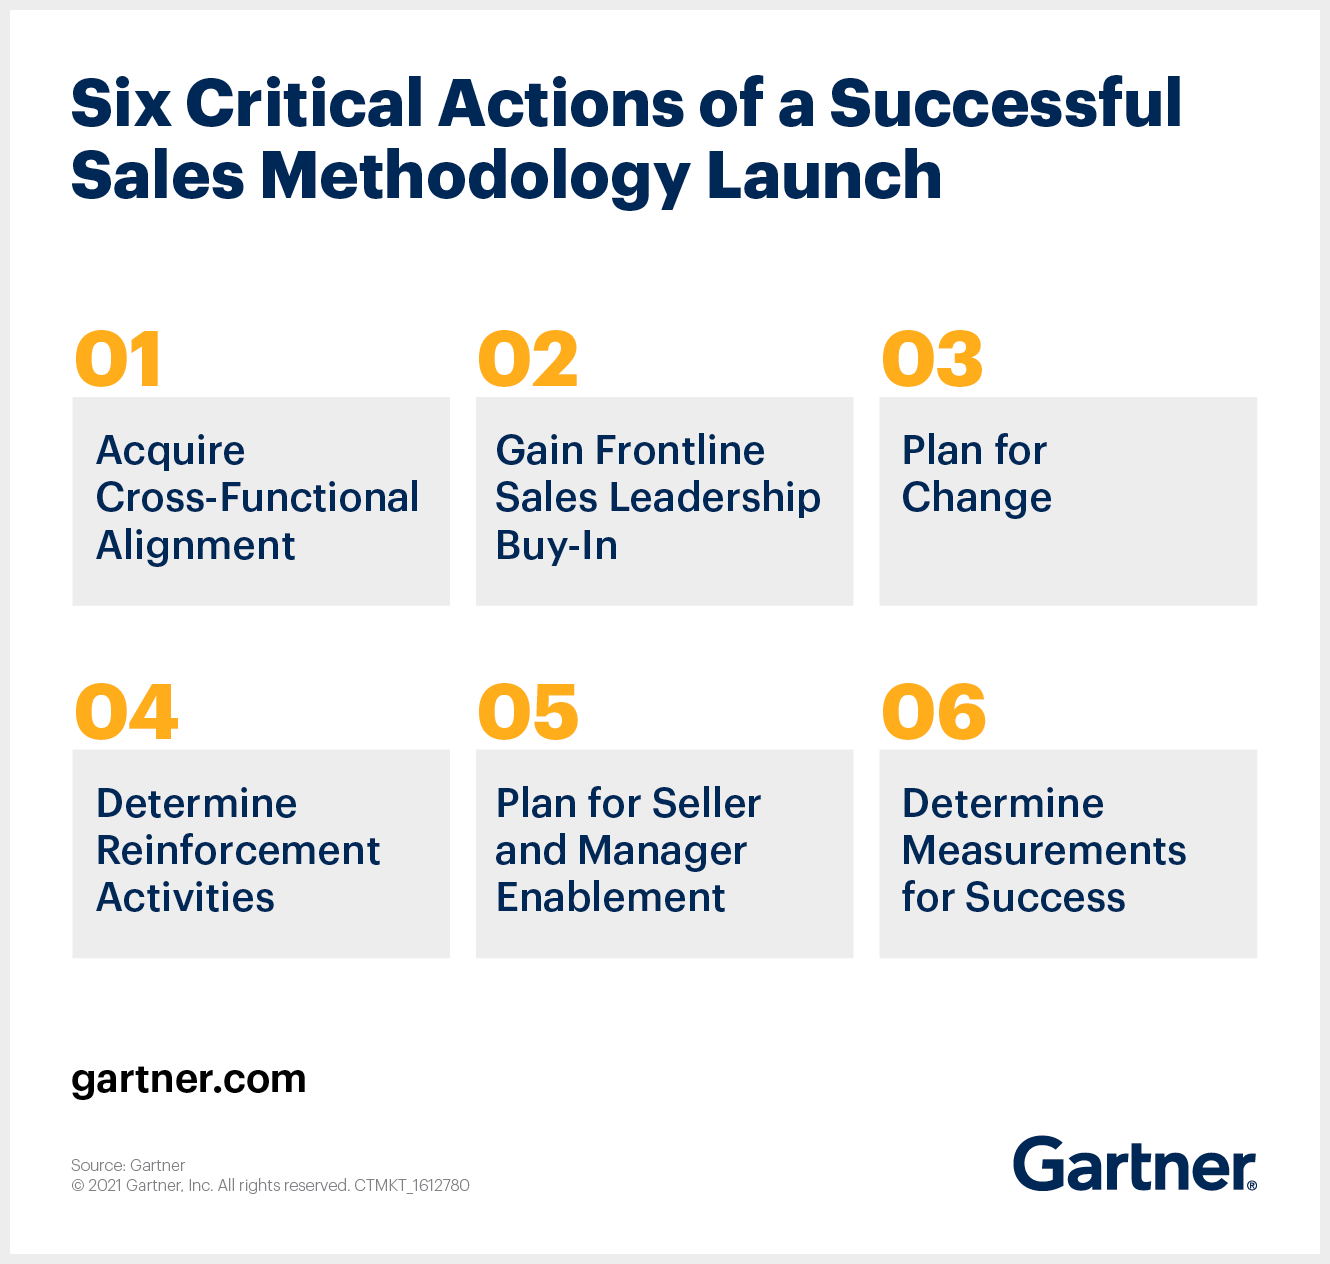 6 critical actions of a successful sales methodology launch